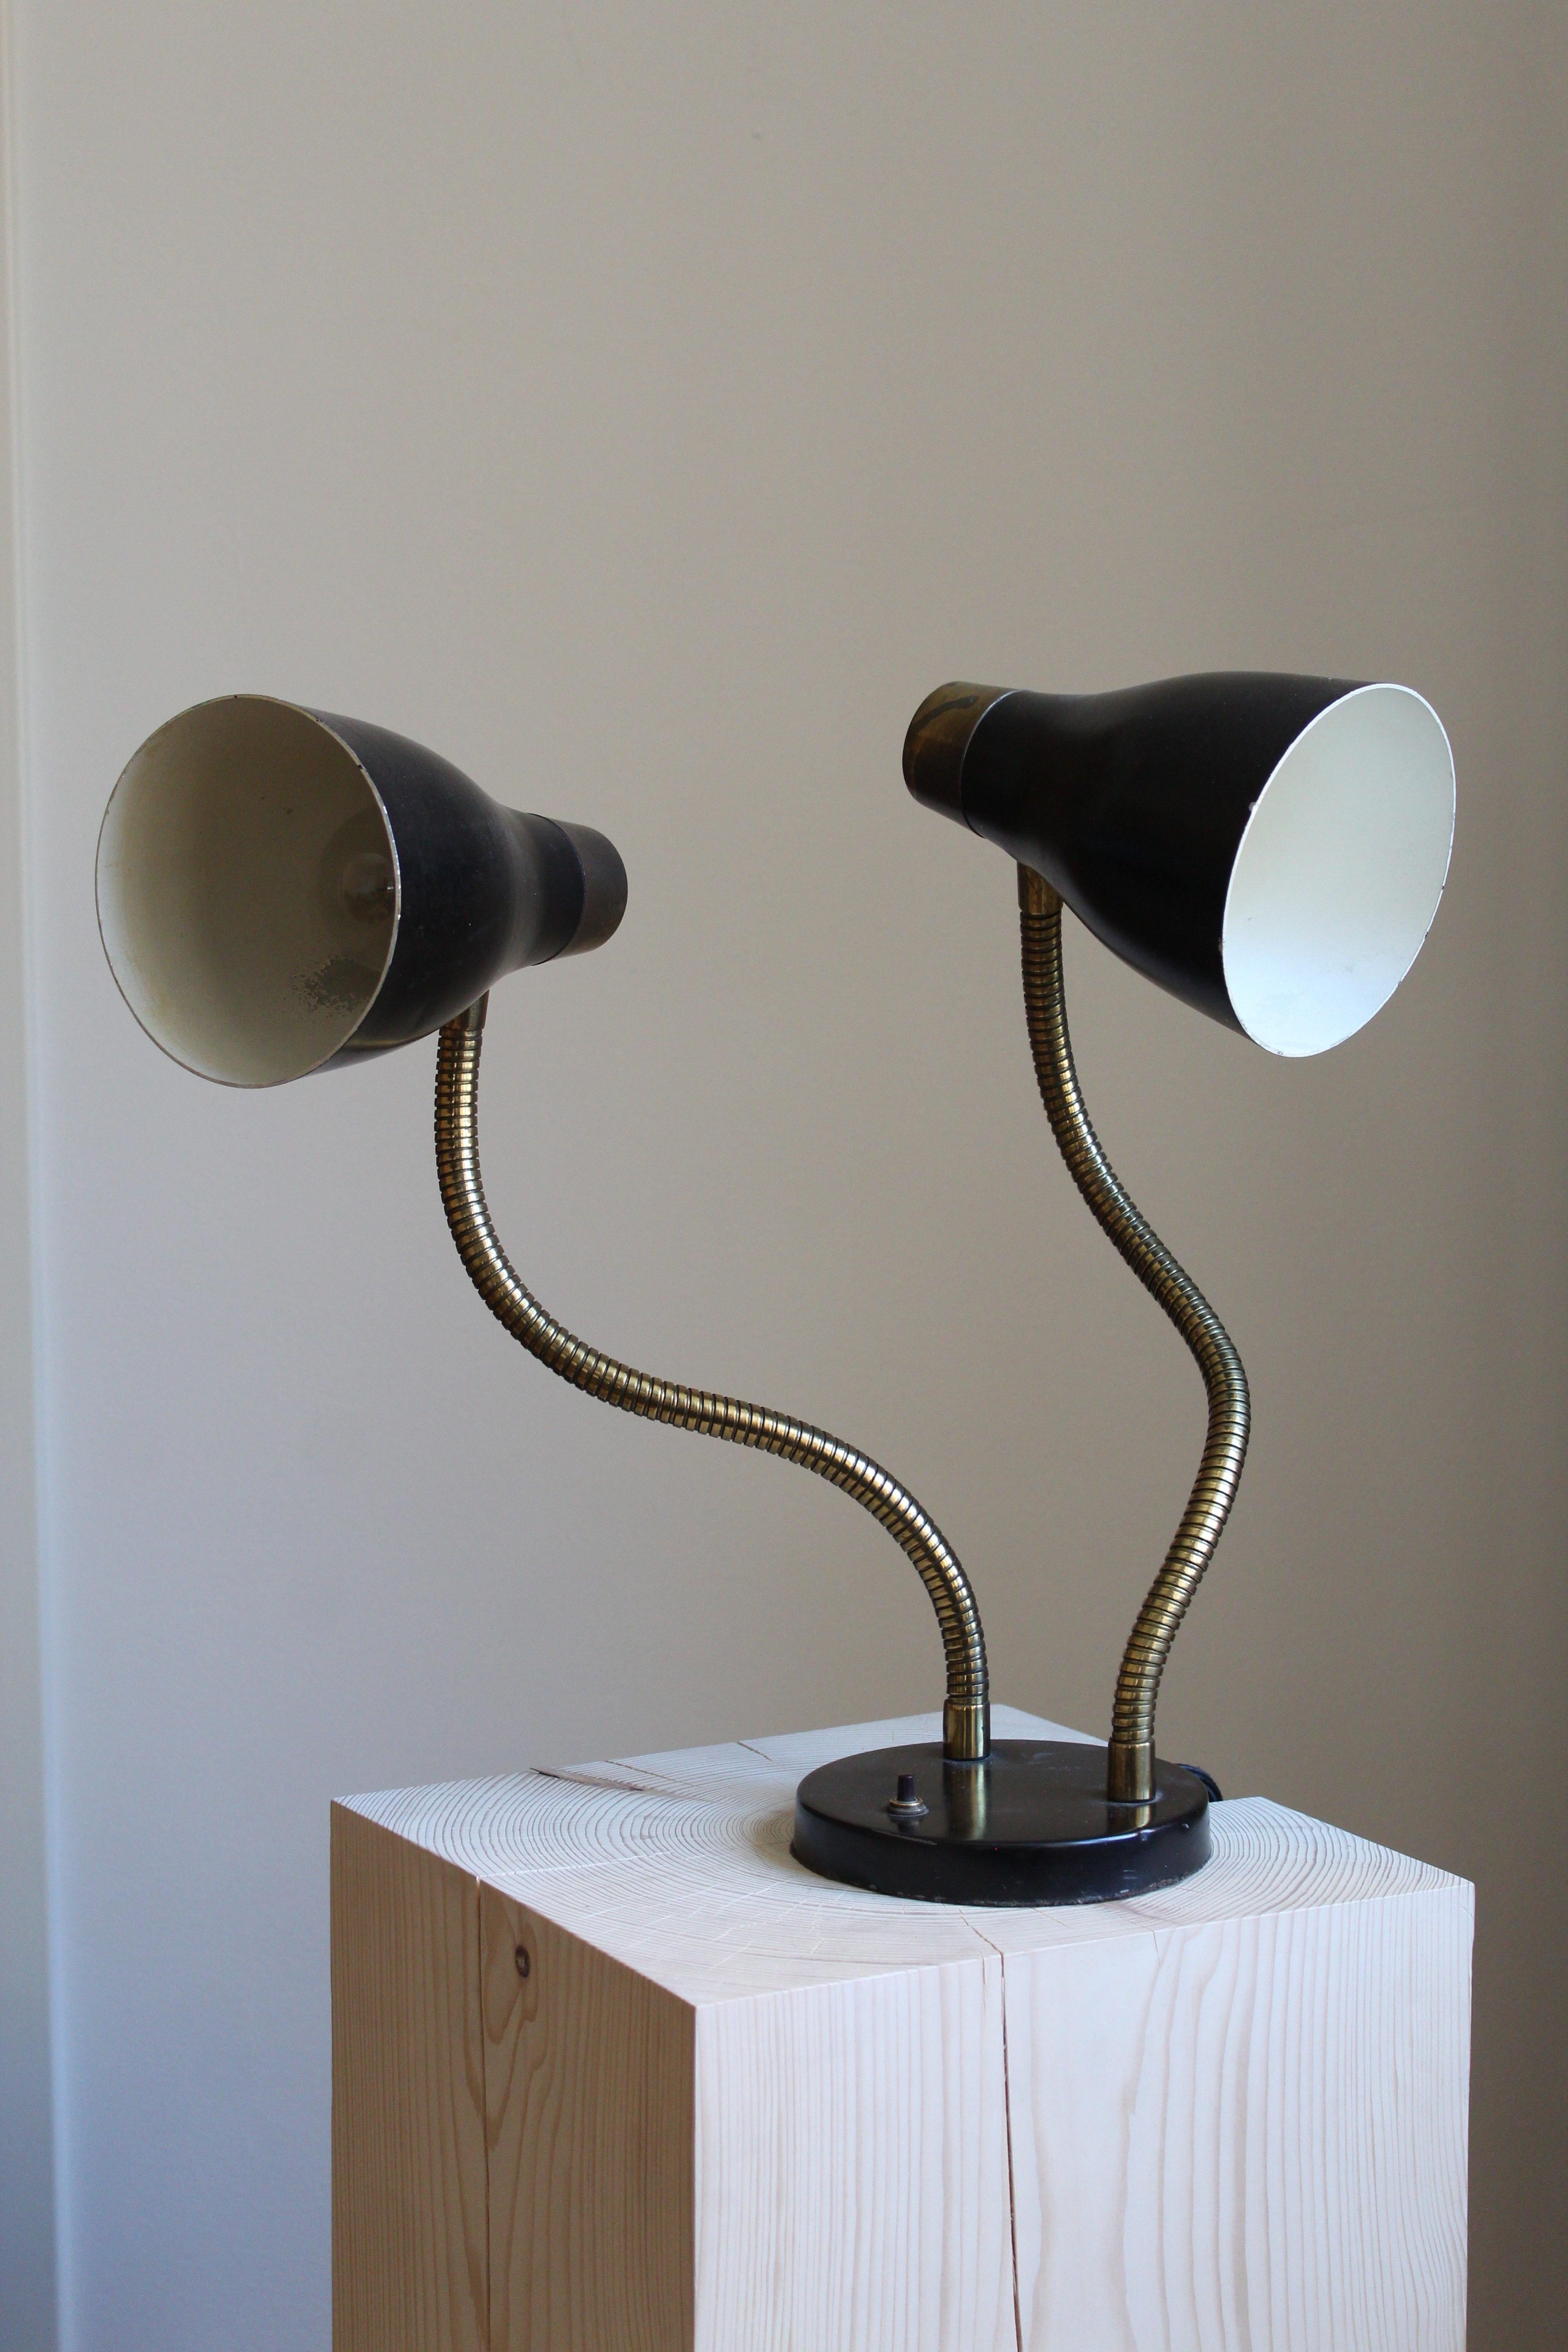 An adjustable table lamp. Designed and produced in Sweden, 1950s. Lacquered metal and brass. 

Other designers of the period include Serge Mouille, Lisa Johansson-Pape, Greta Magnusson Grossman, and Paavo Tynell.